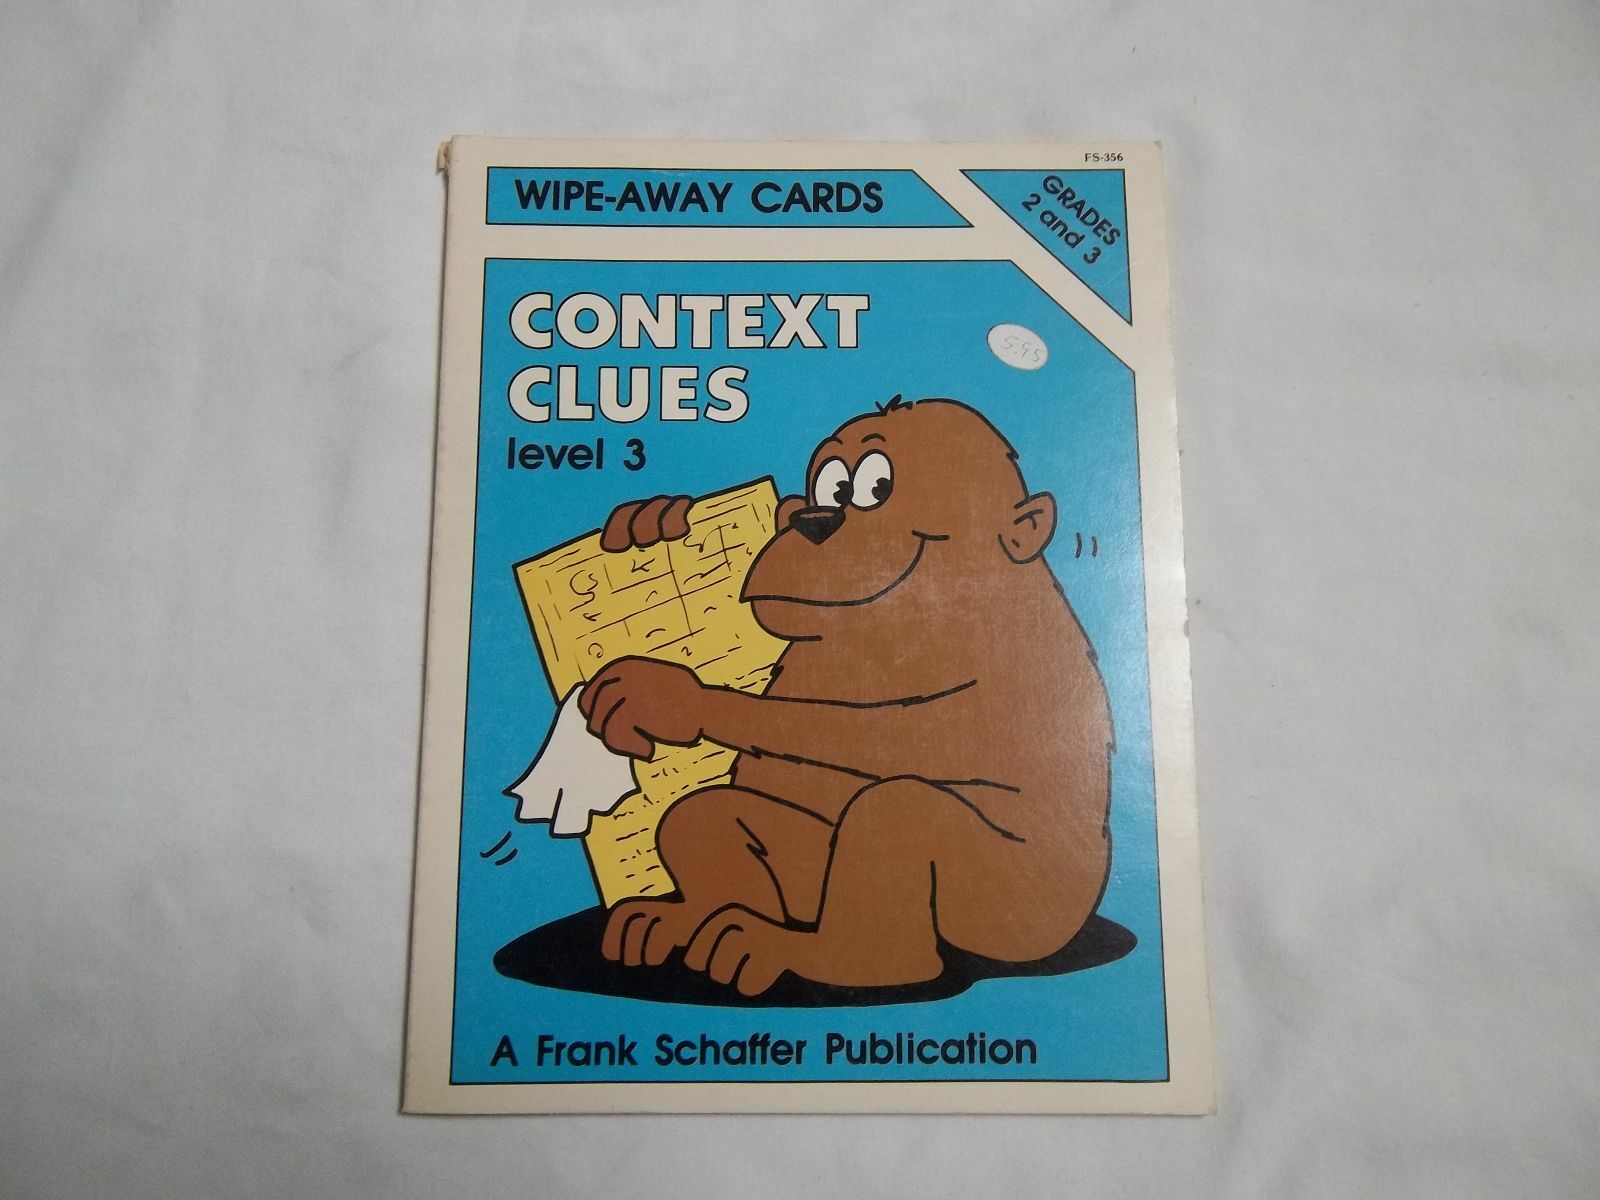 FS356 CONTEXT CLUES WIPE-AWAY CARDS